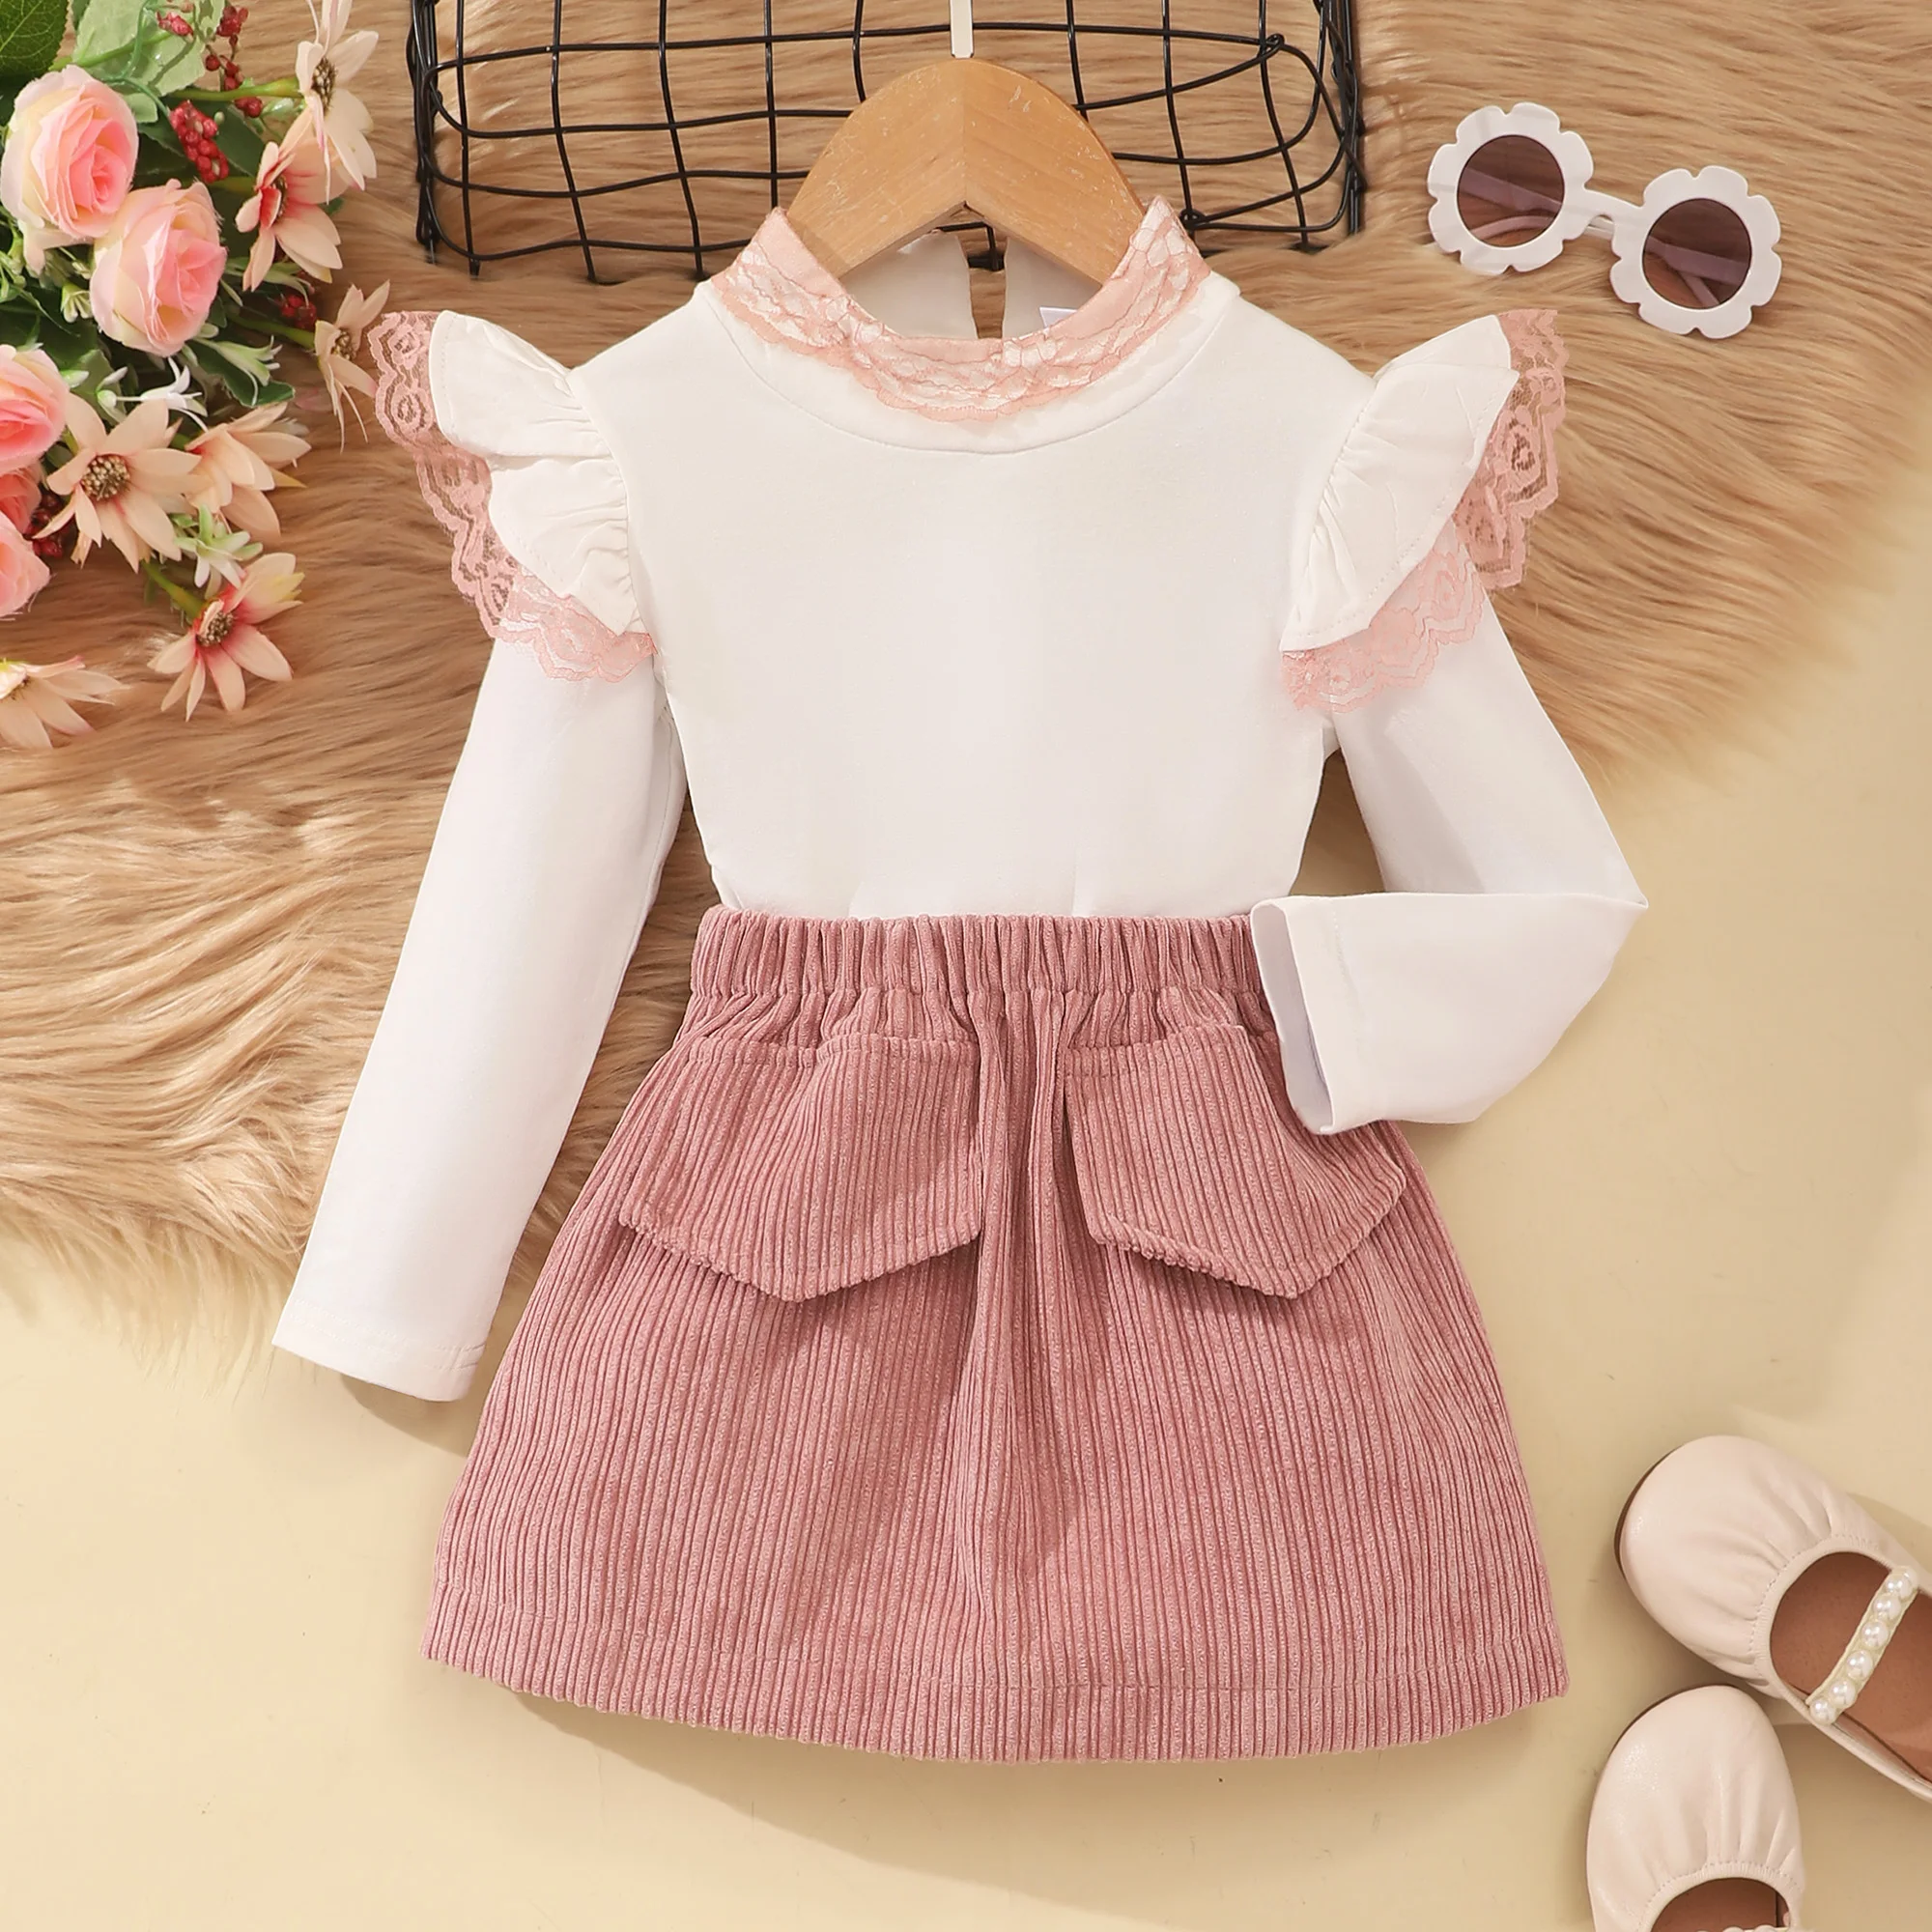 

Teen Girls Clothing Girls Outfits 2 Pcs Sets Lace Flying Sleeve Tops+skirt Spring Autumn Girl Clothes Fashion Kids Clothes 1-6Y